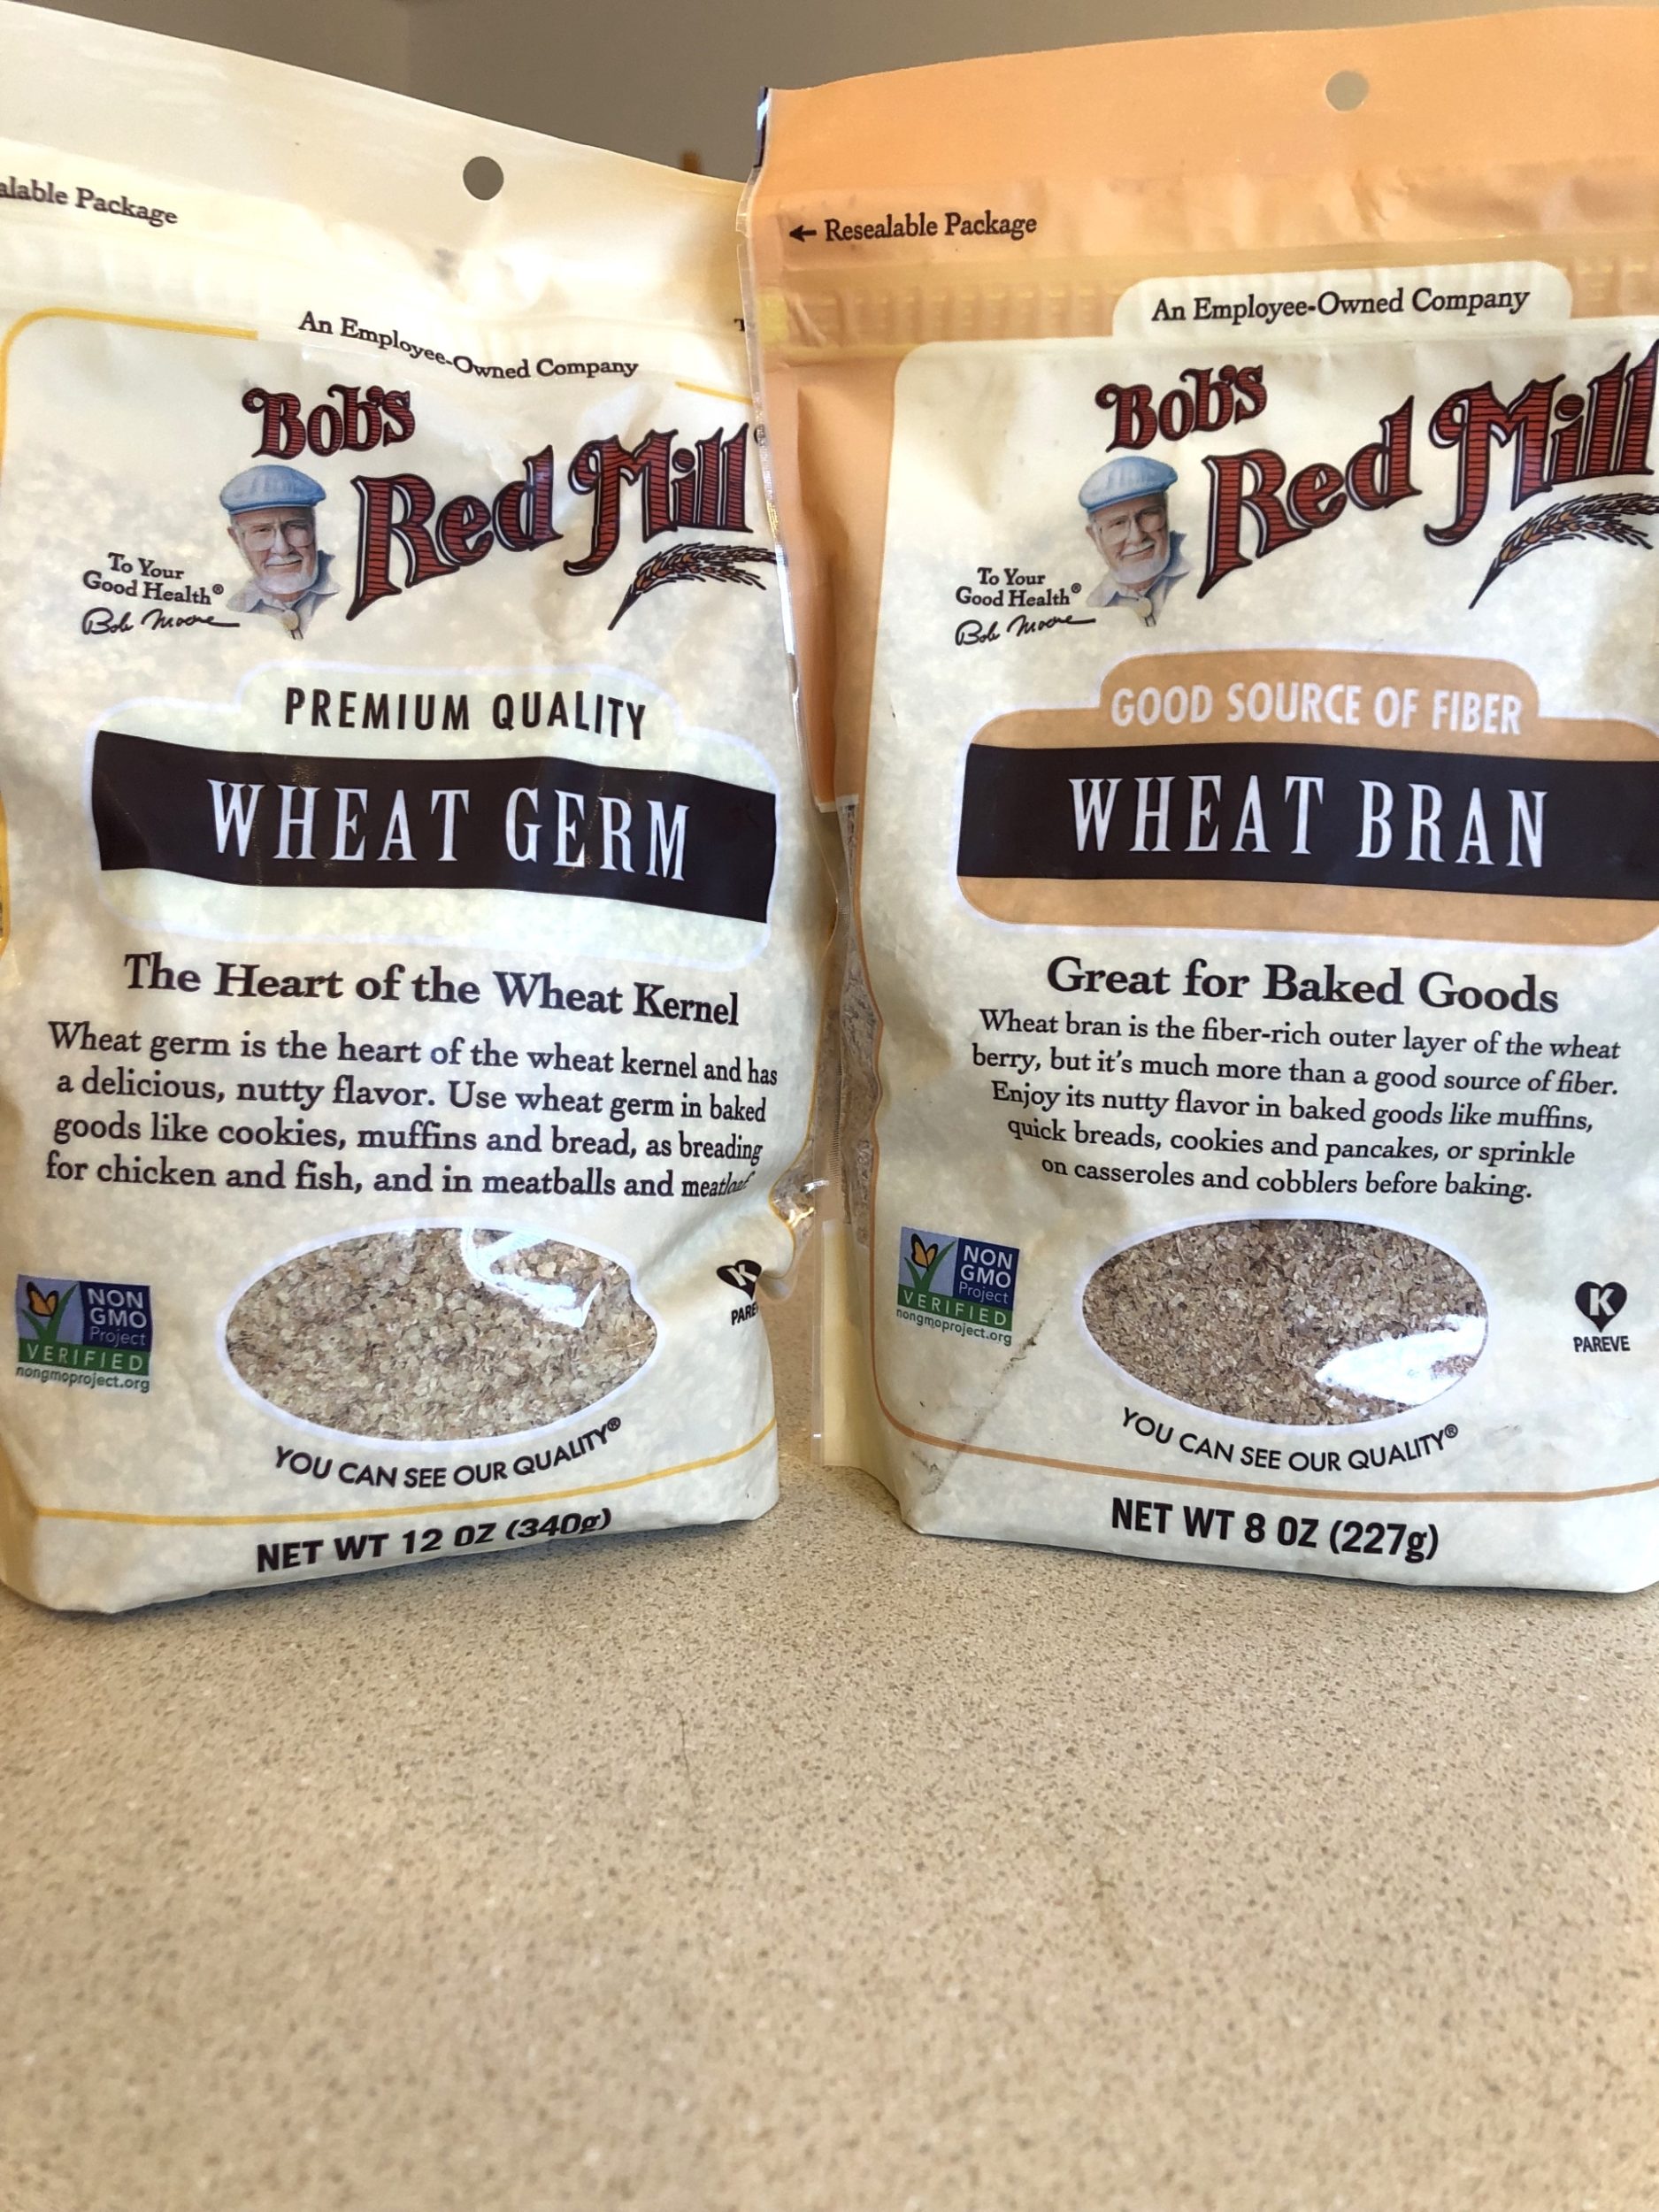 Picture of Bob's Red Mill wheat germ and Bob's Red Mill wheat bran bags.